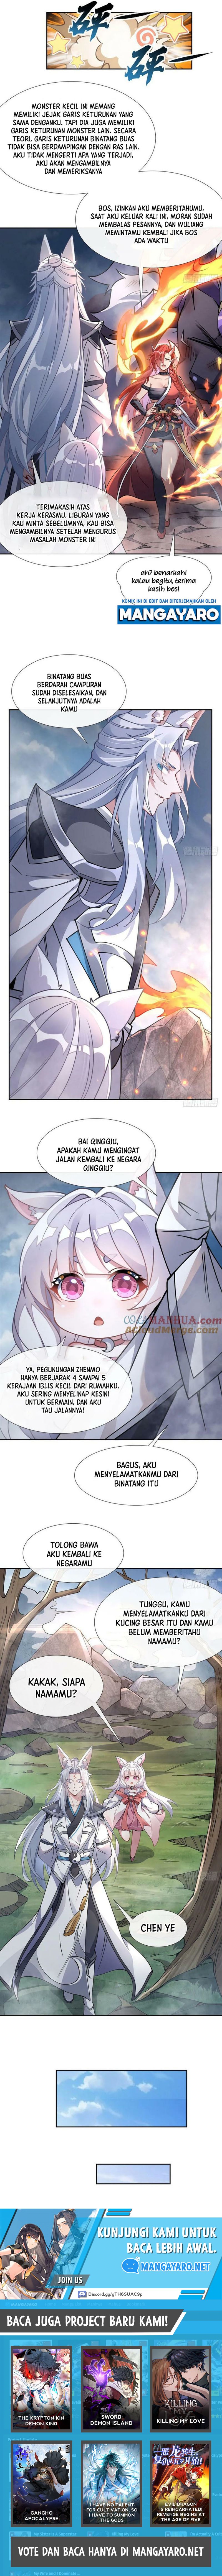 Dilarang COPAS - situs resmi www.mangacanblog.com - Komik my female apprentices are all big shots from the future 167 - chapter 167 168 Indonesia my female apprentices are all big shots from the future 167 - chapter 167 Terbaru 7|Baca Manga Komik Indonesia|Mangacan